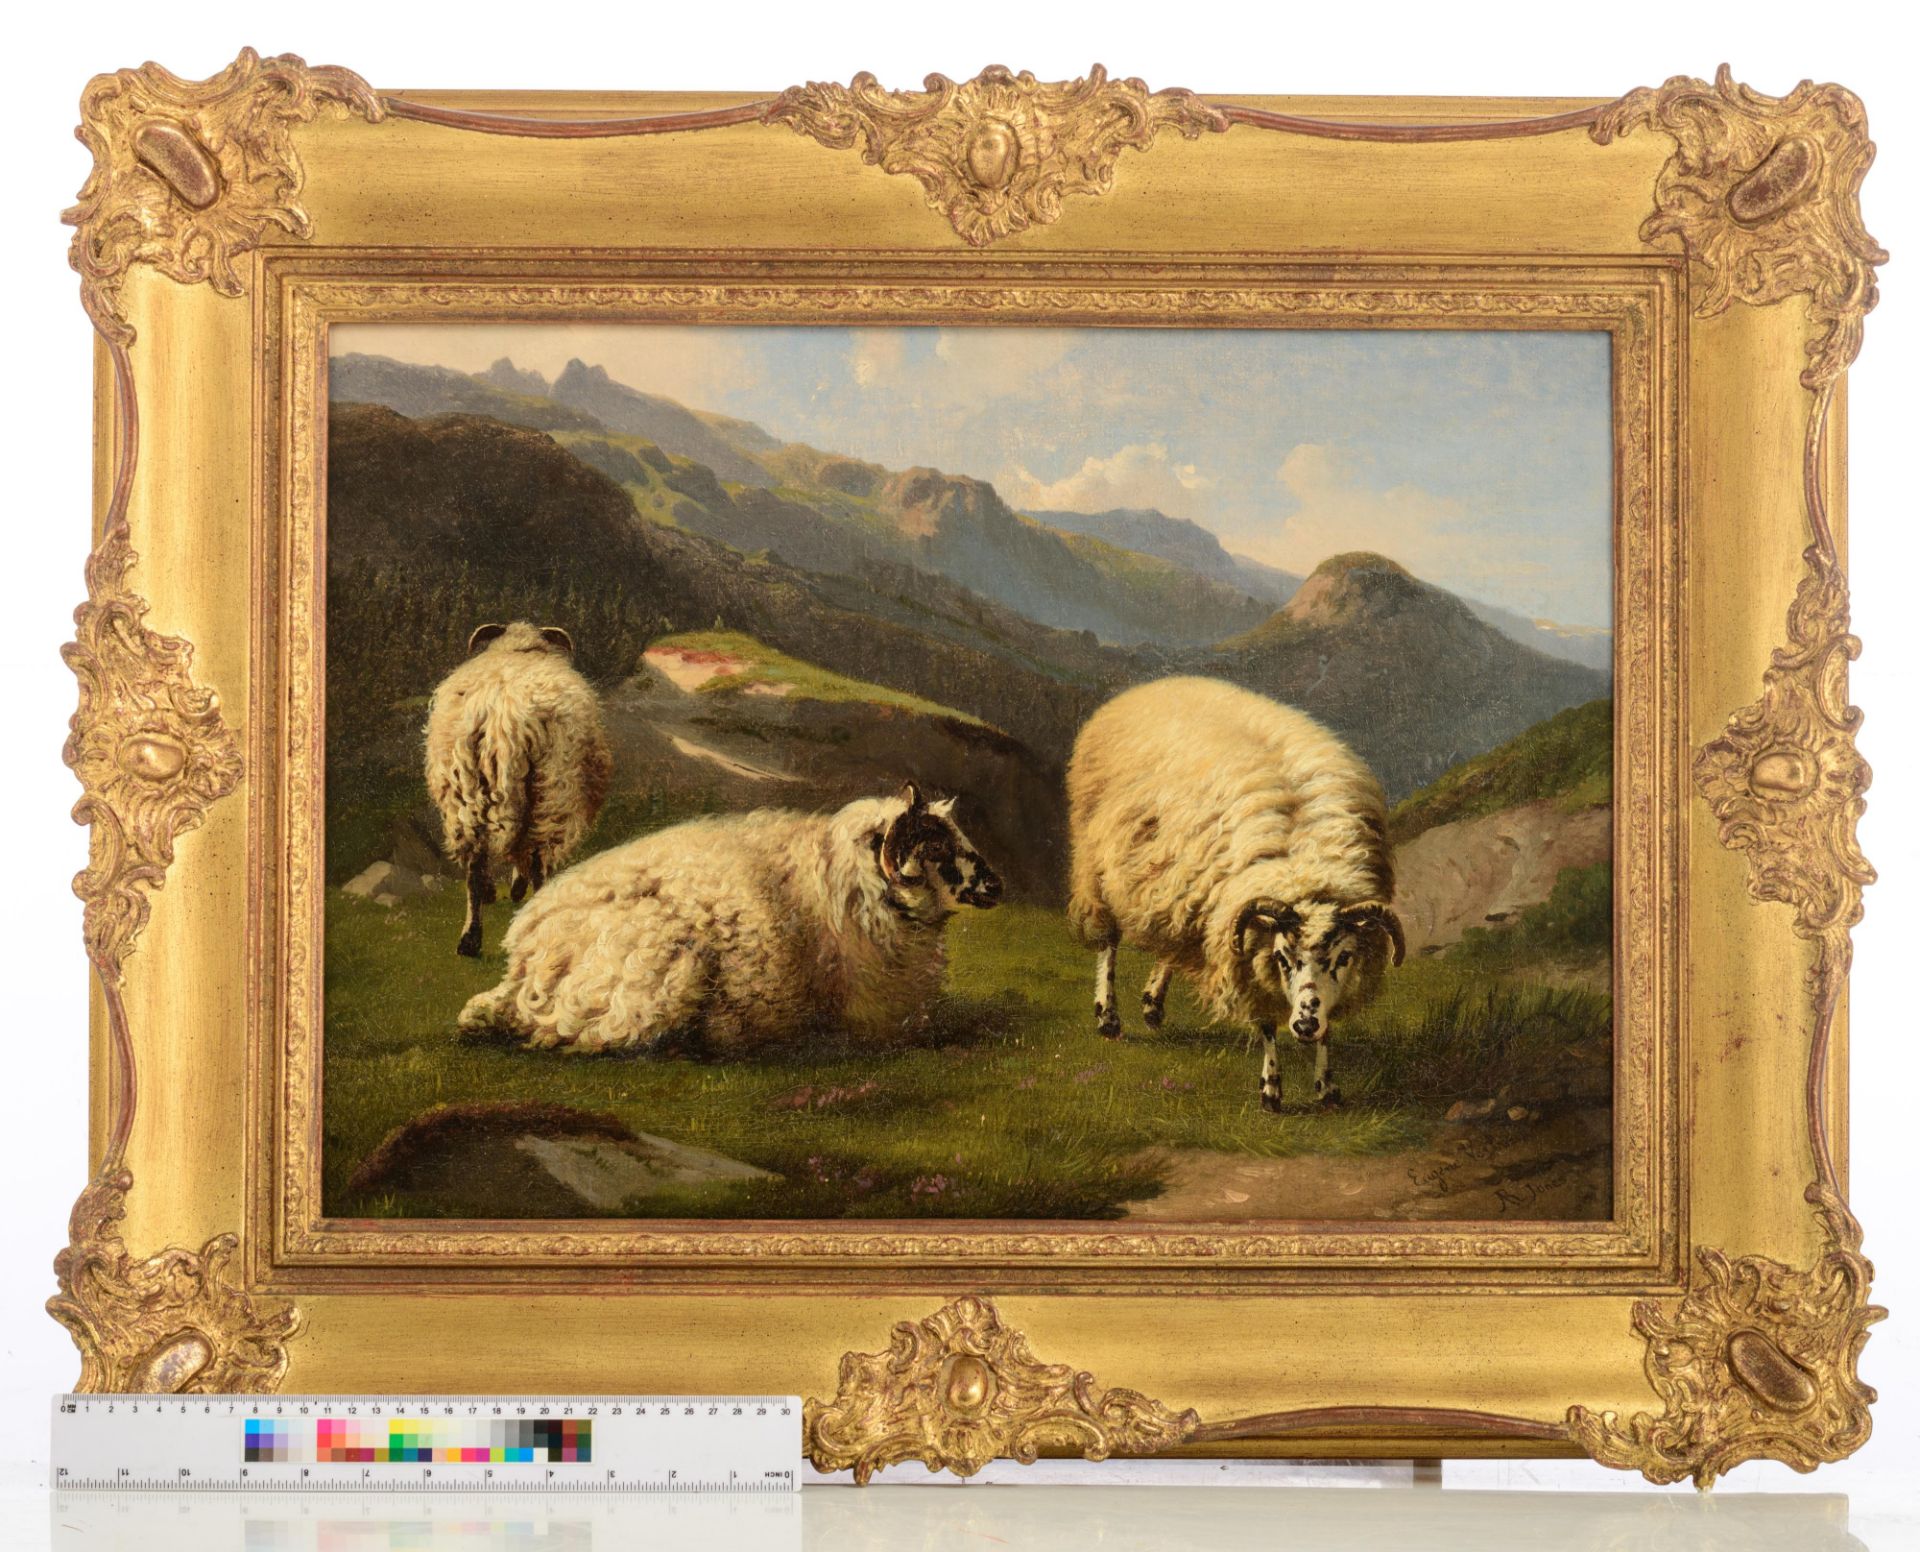 (Verboeckhoven E.) and Jones R., sheep in a mountainous landscape, oil on canvas, 39,5 x 56,5 cm - Image 8 of 8